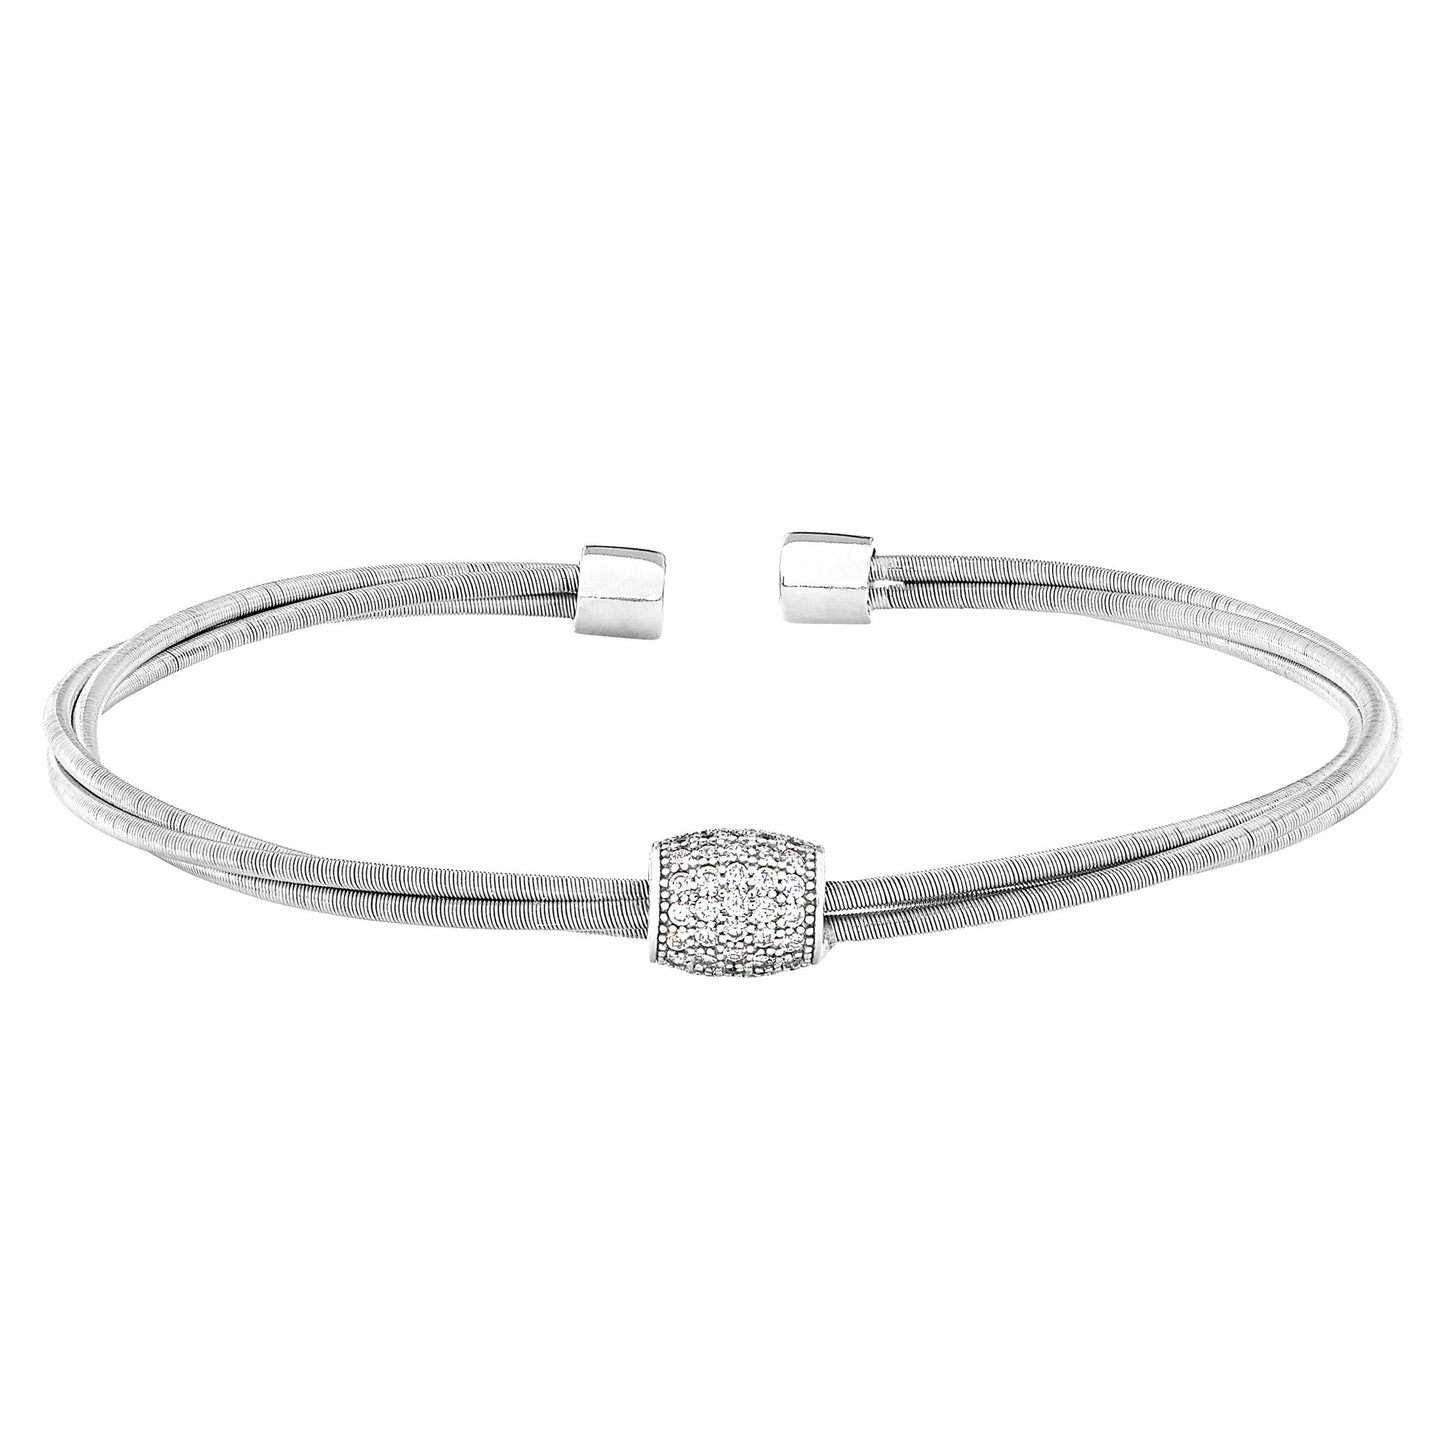 A twisted three cable bracelet with five rows of simulated diamond barrel displayed on a neutral white background.